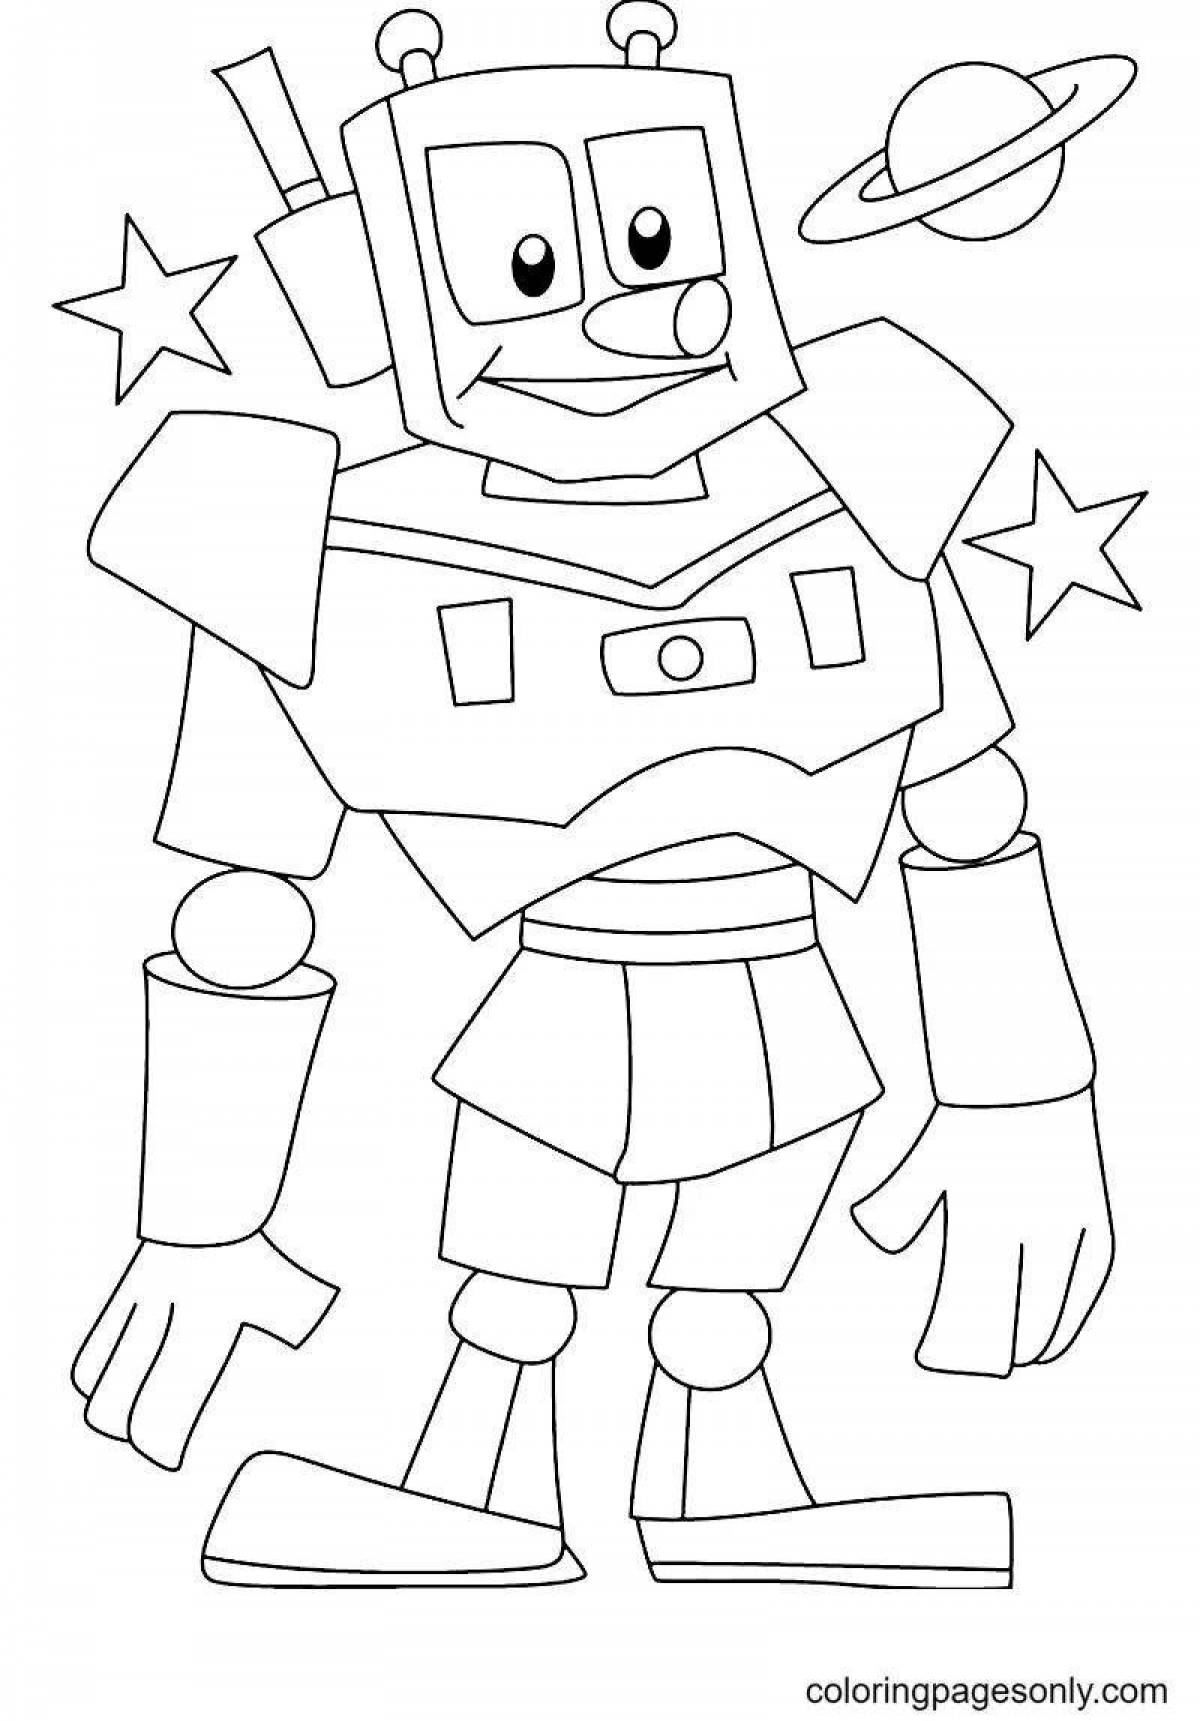 Fun robot coloring book for 5 year olds